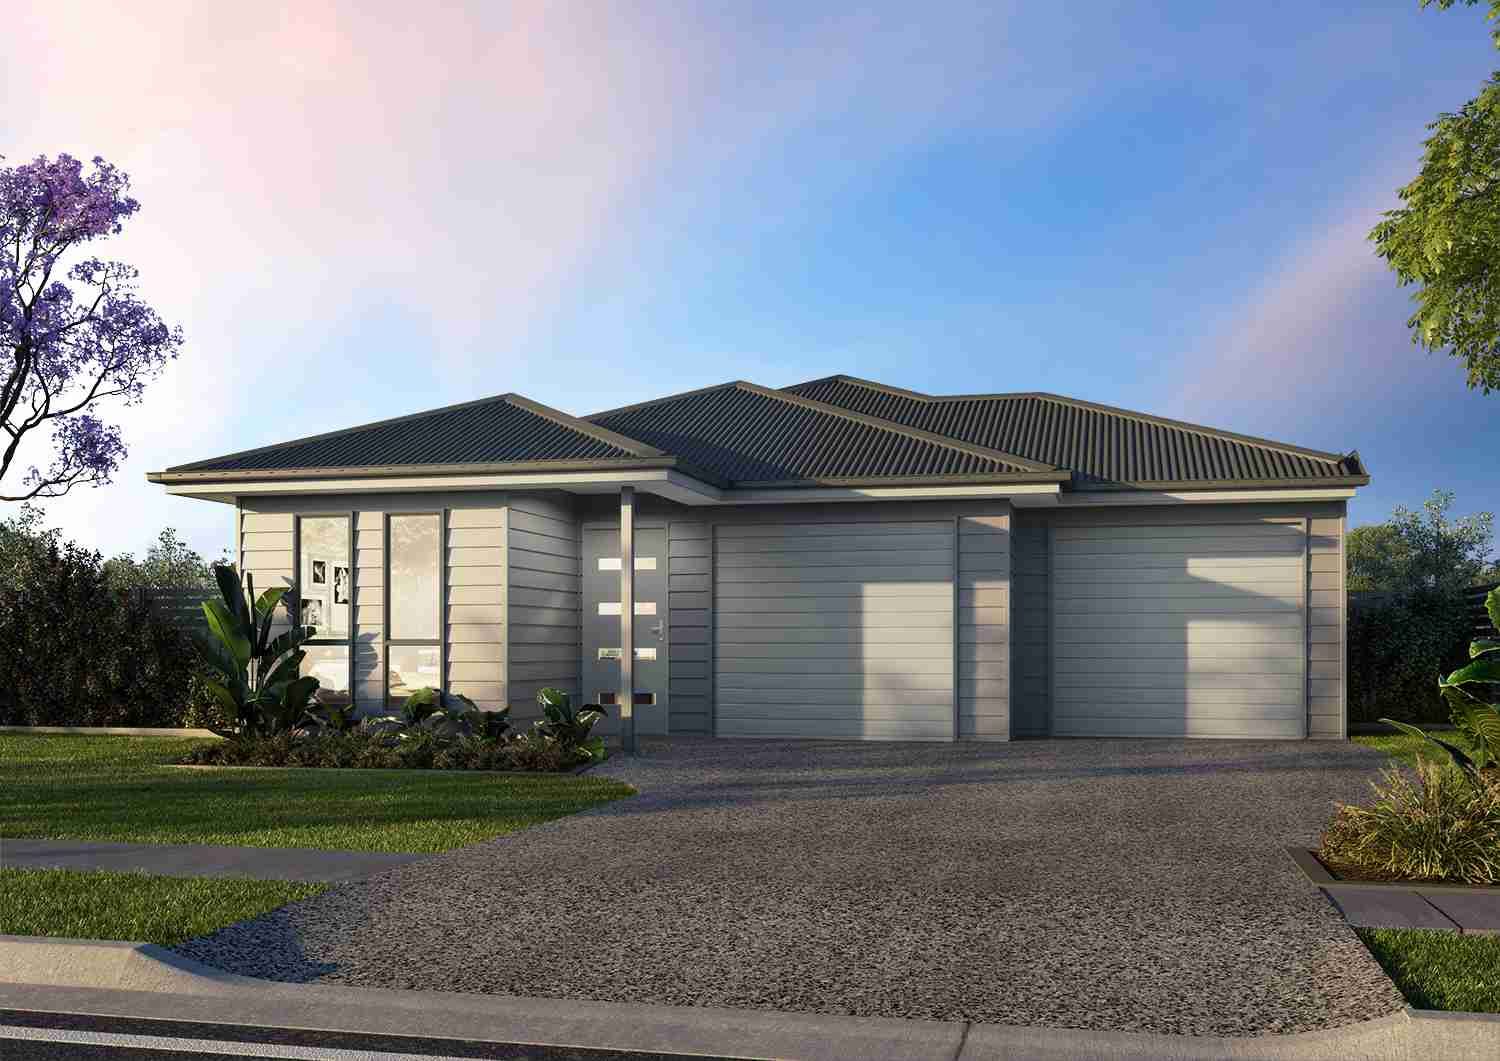 5 bedrooms New House & Land in  WOODFORD QLD, 4514